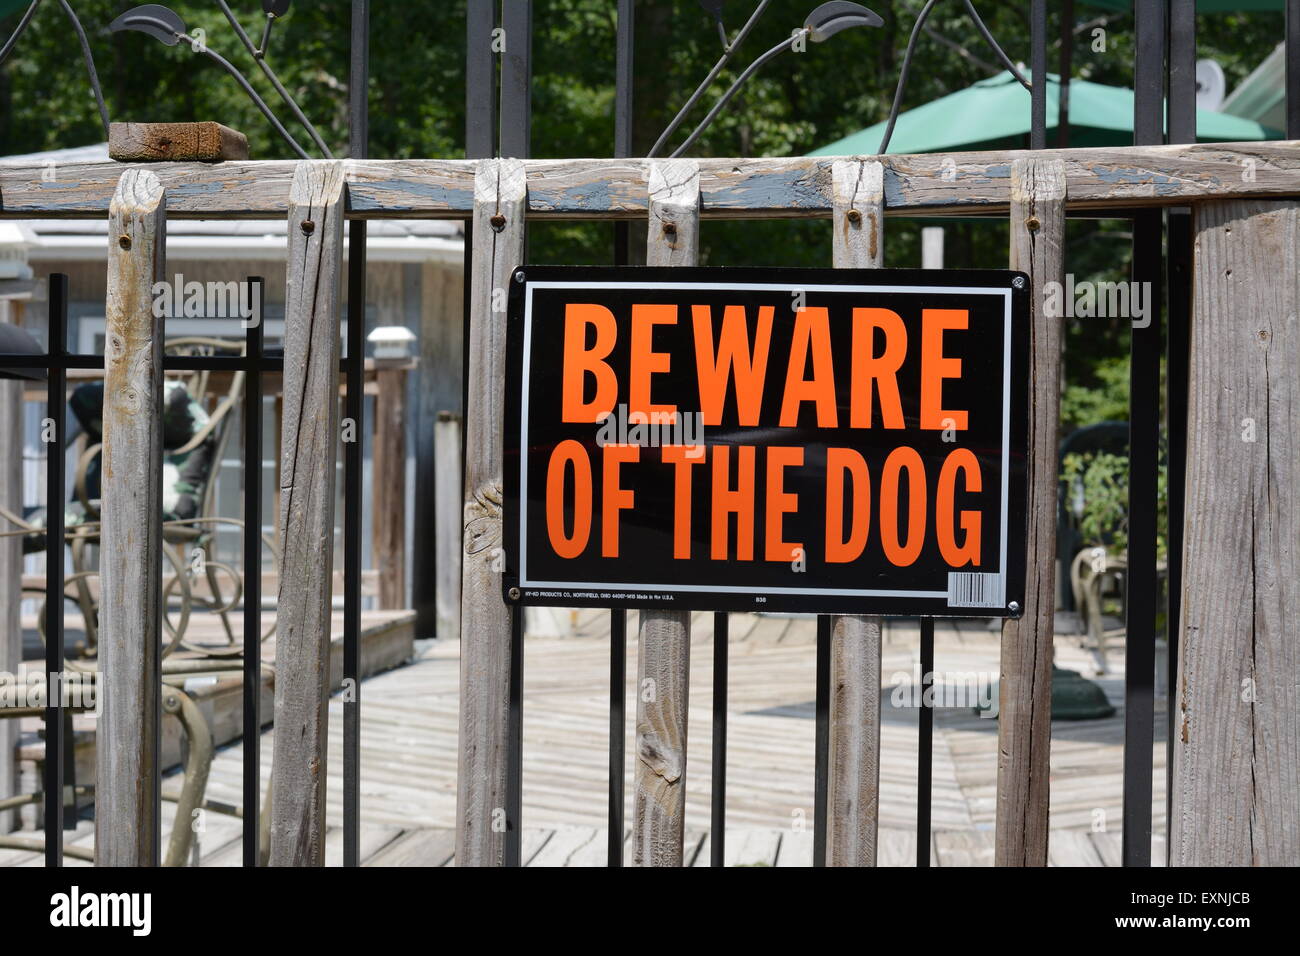 a-beware-of-dog-sign-stock-photo-alamy